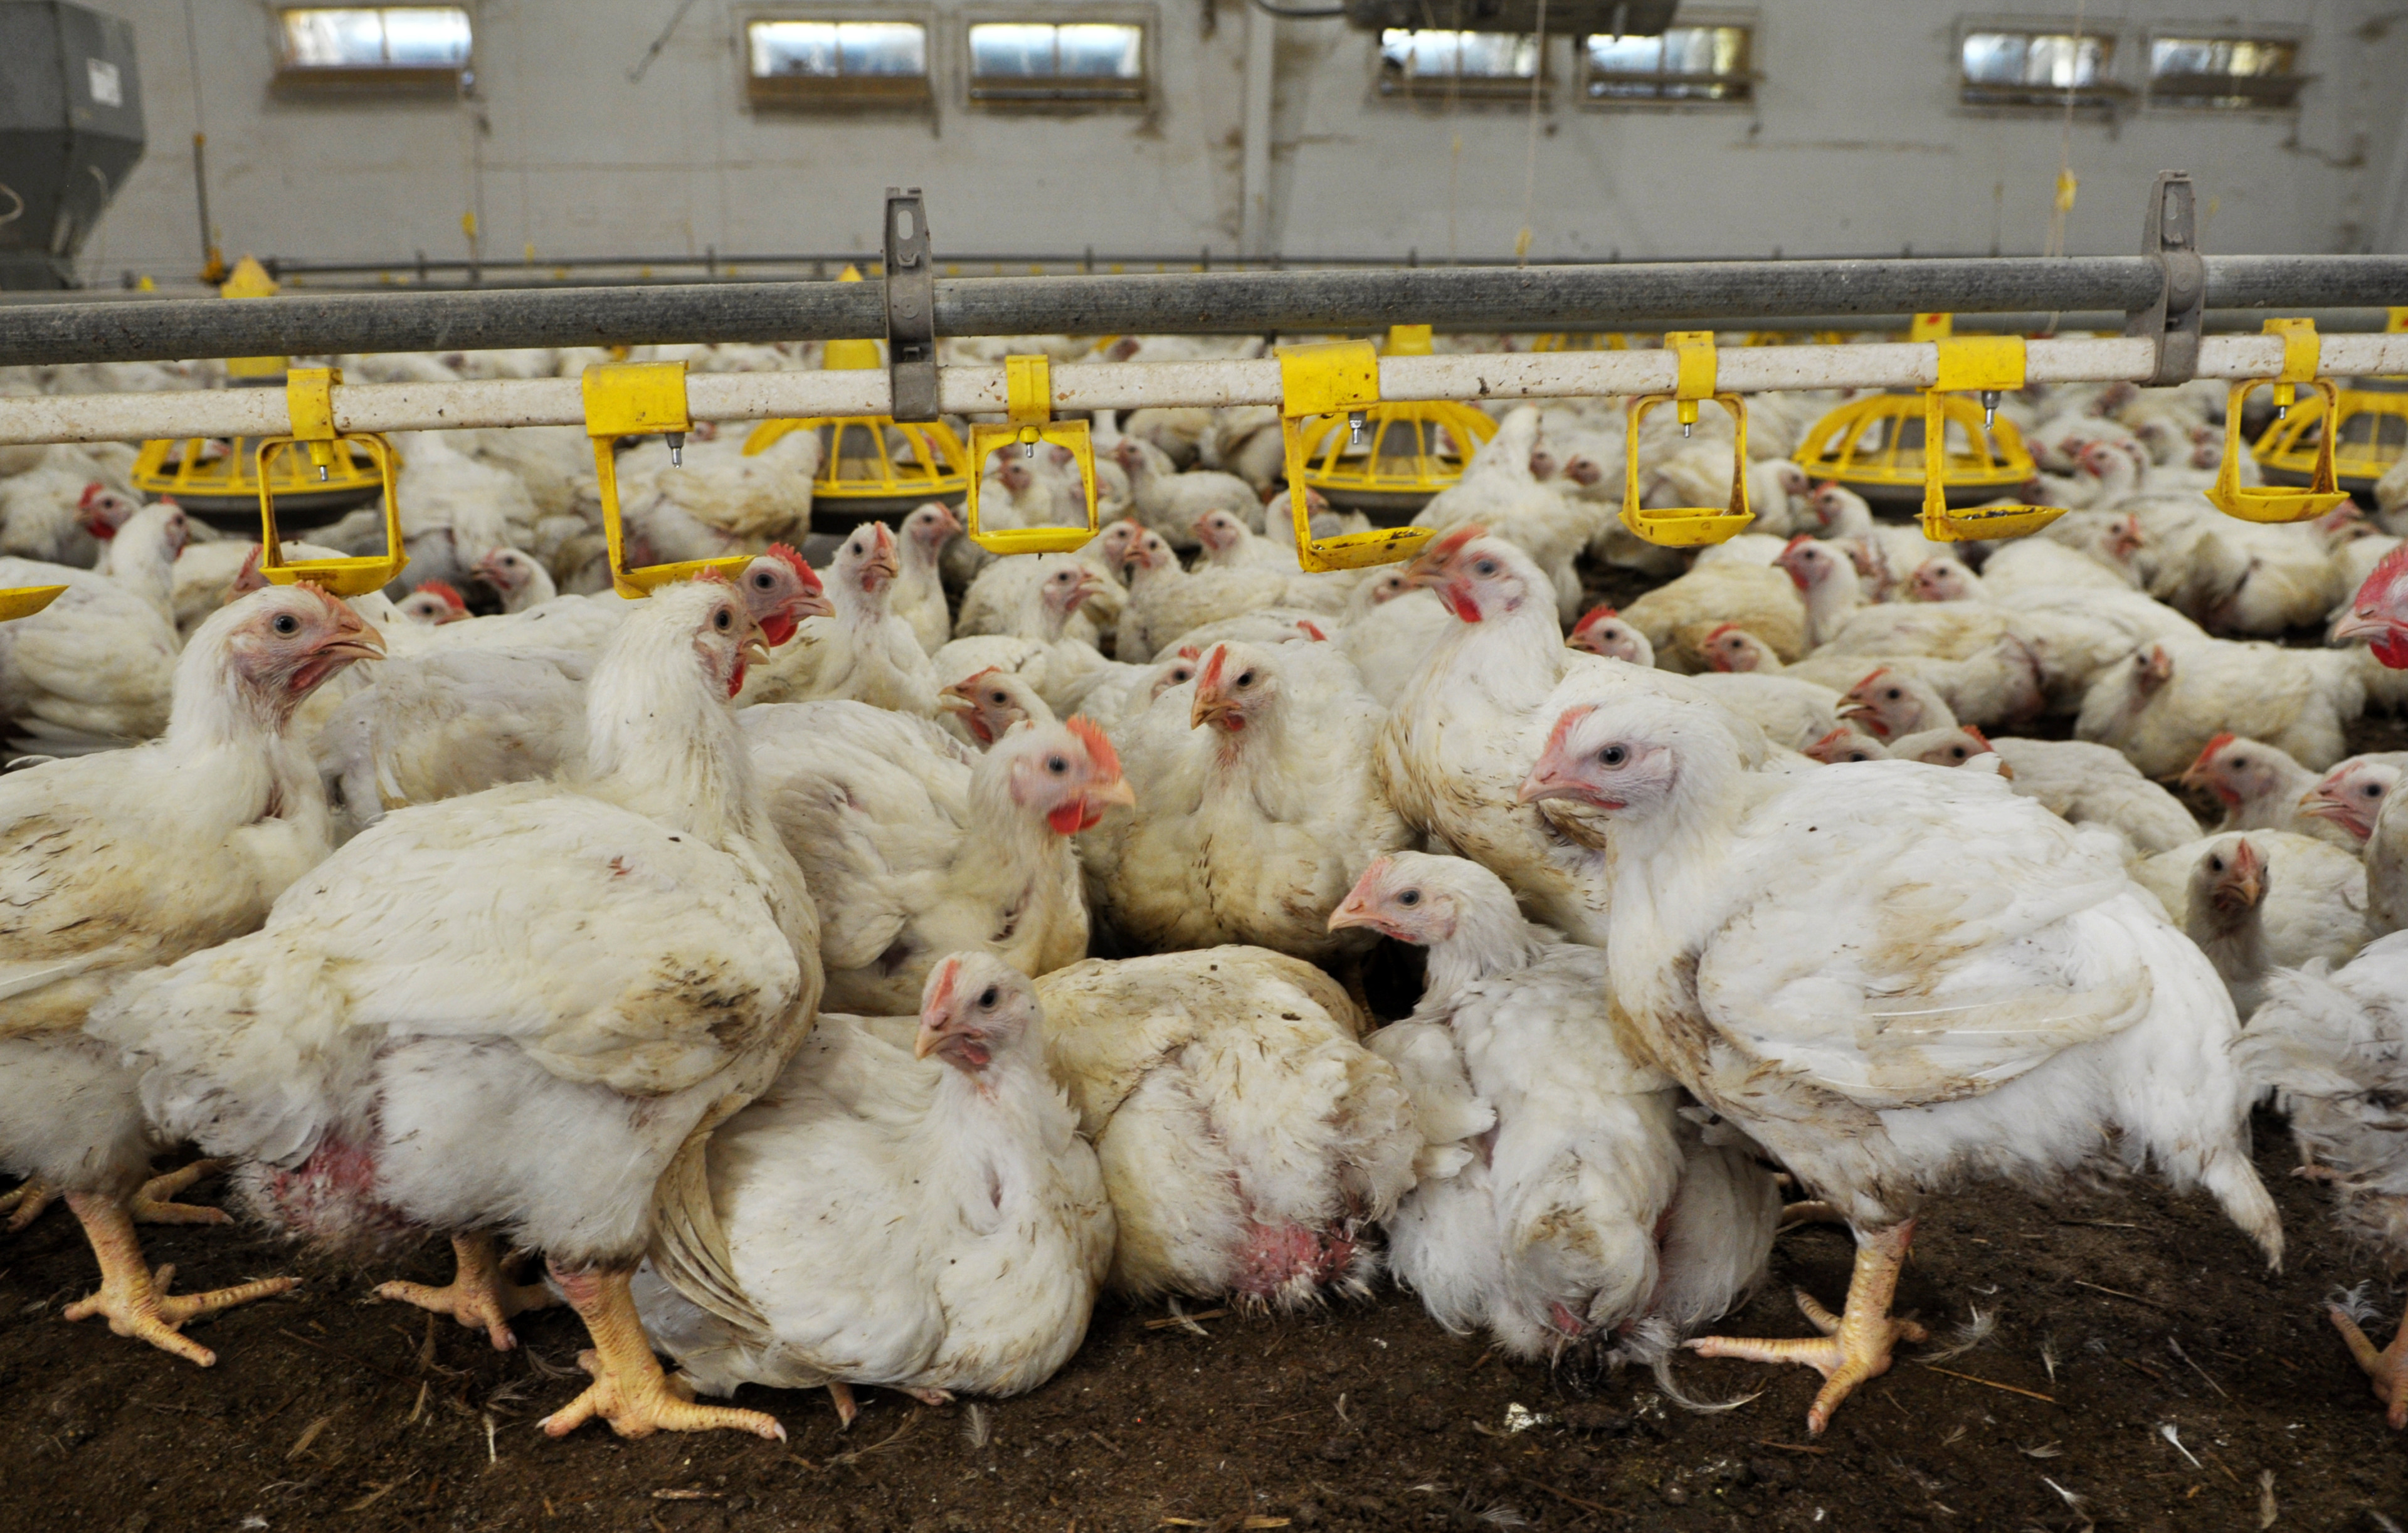 Factory Chickens What Is Life Like for Chickens in Factory Farms? pic